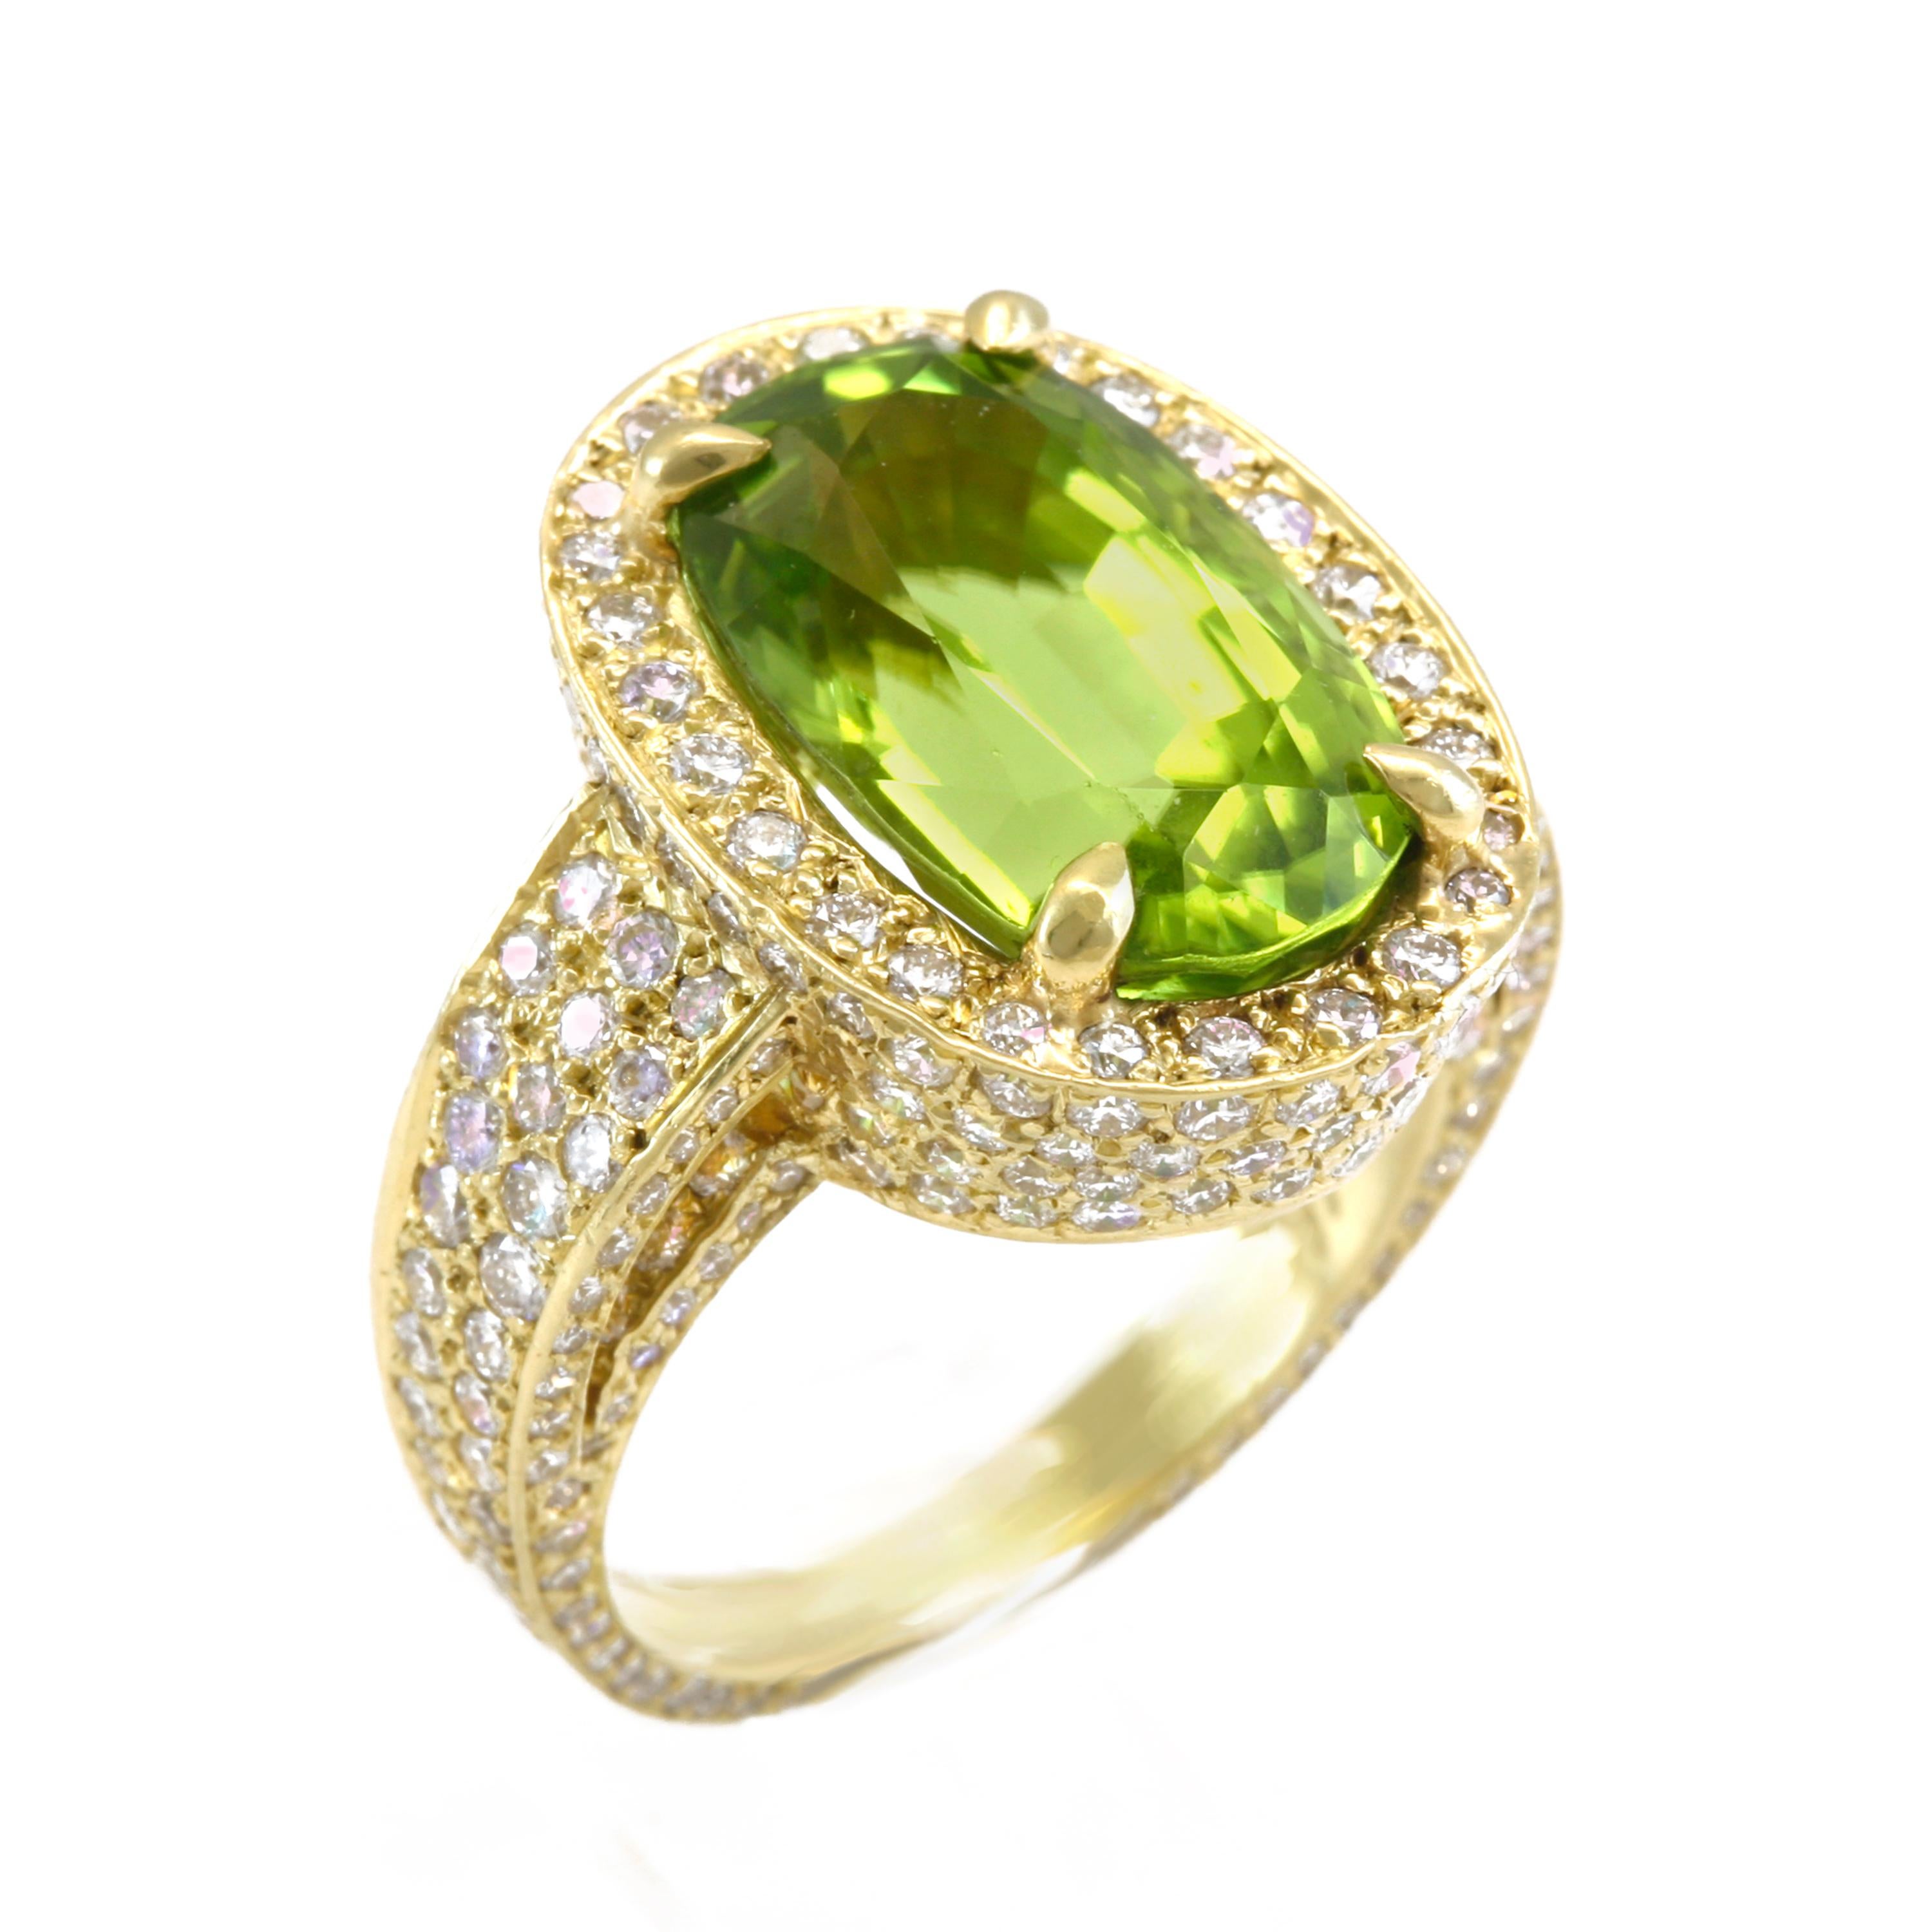 Diana Kim England Burmese Peridot Ring with Micro Pave Diamonds Set in 18k Gold In New Condition For Sale In Red Hook, NY